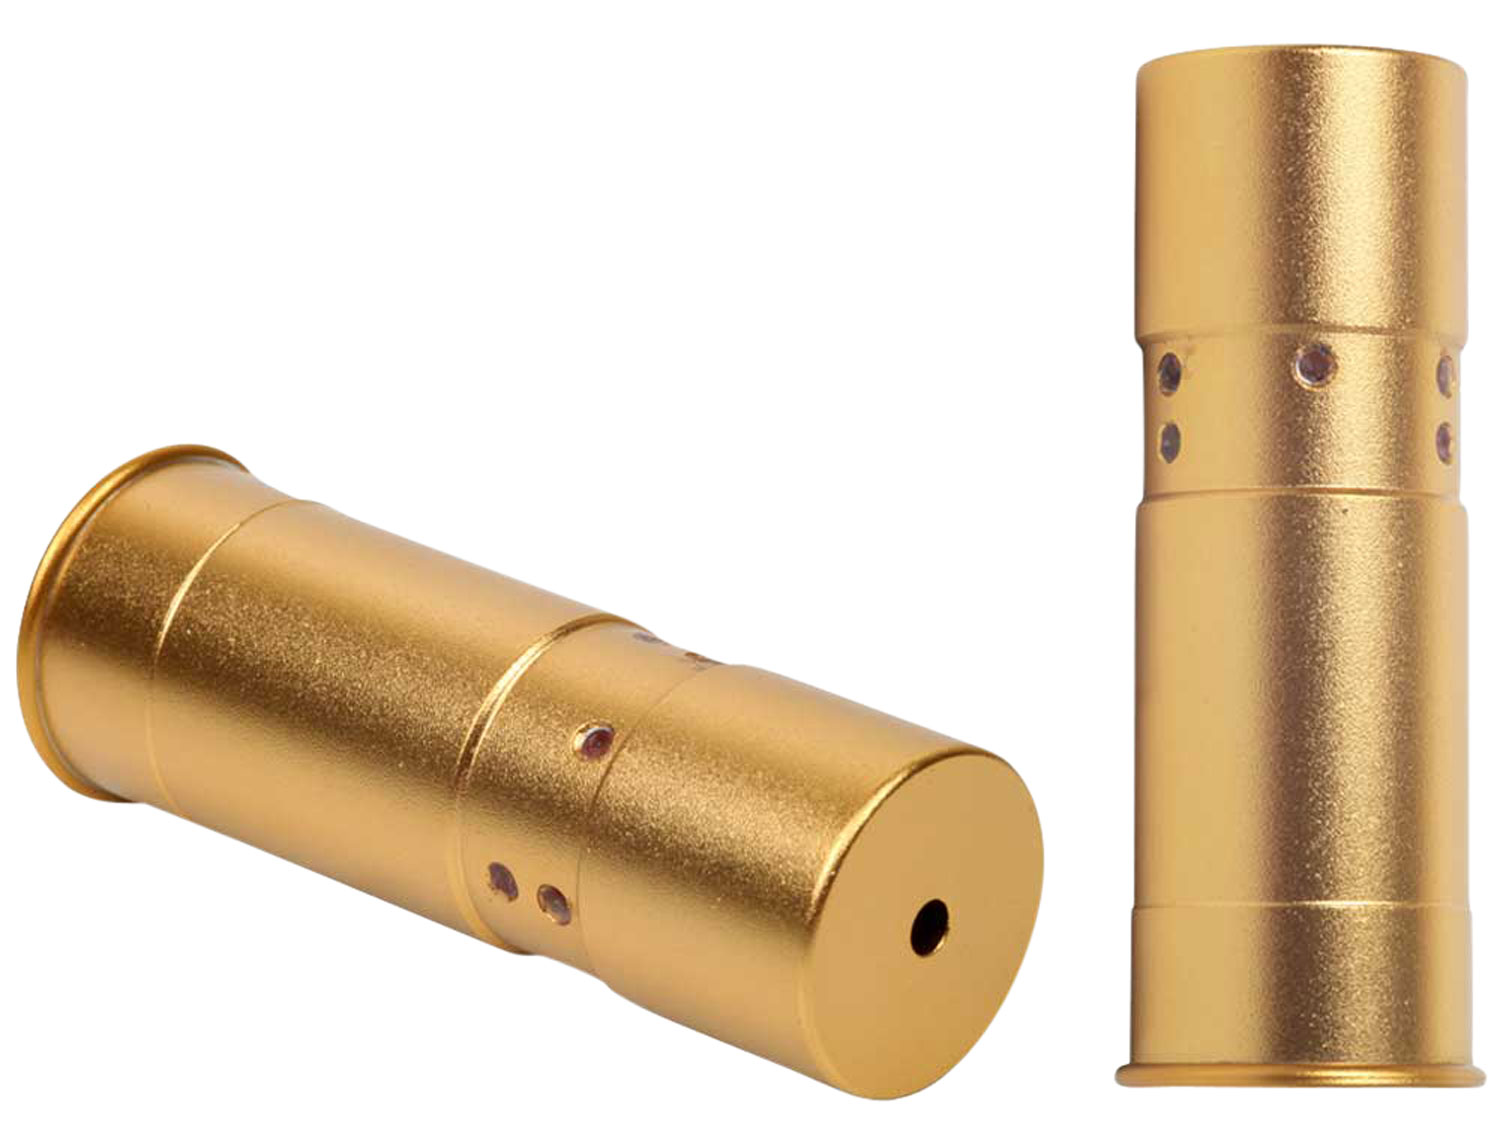 Sightmark SM39007 Boresight  Red Laser for 12 Gauge Brass Includes Battery Pack & Carrying Case